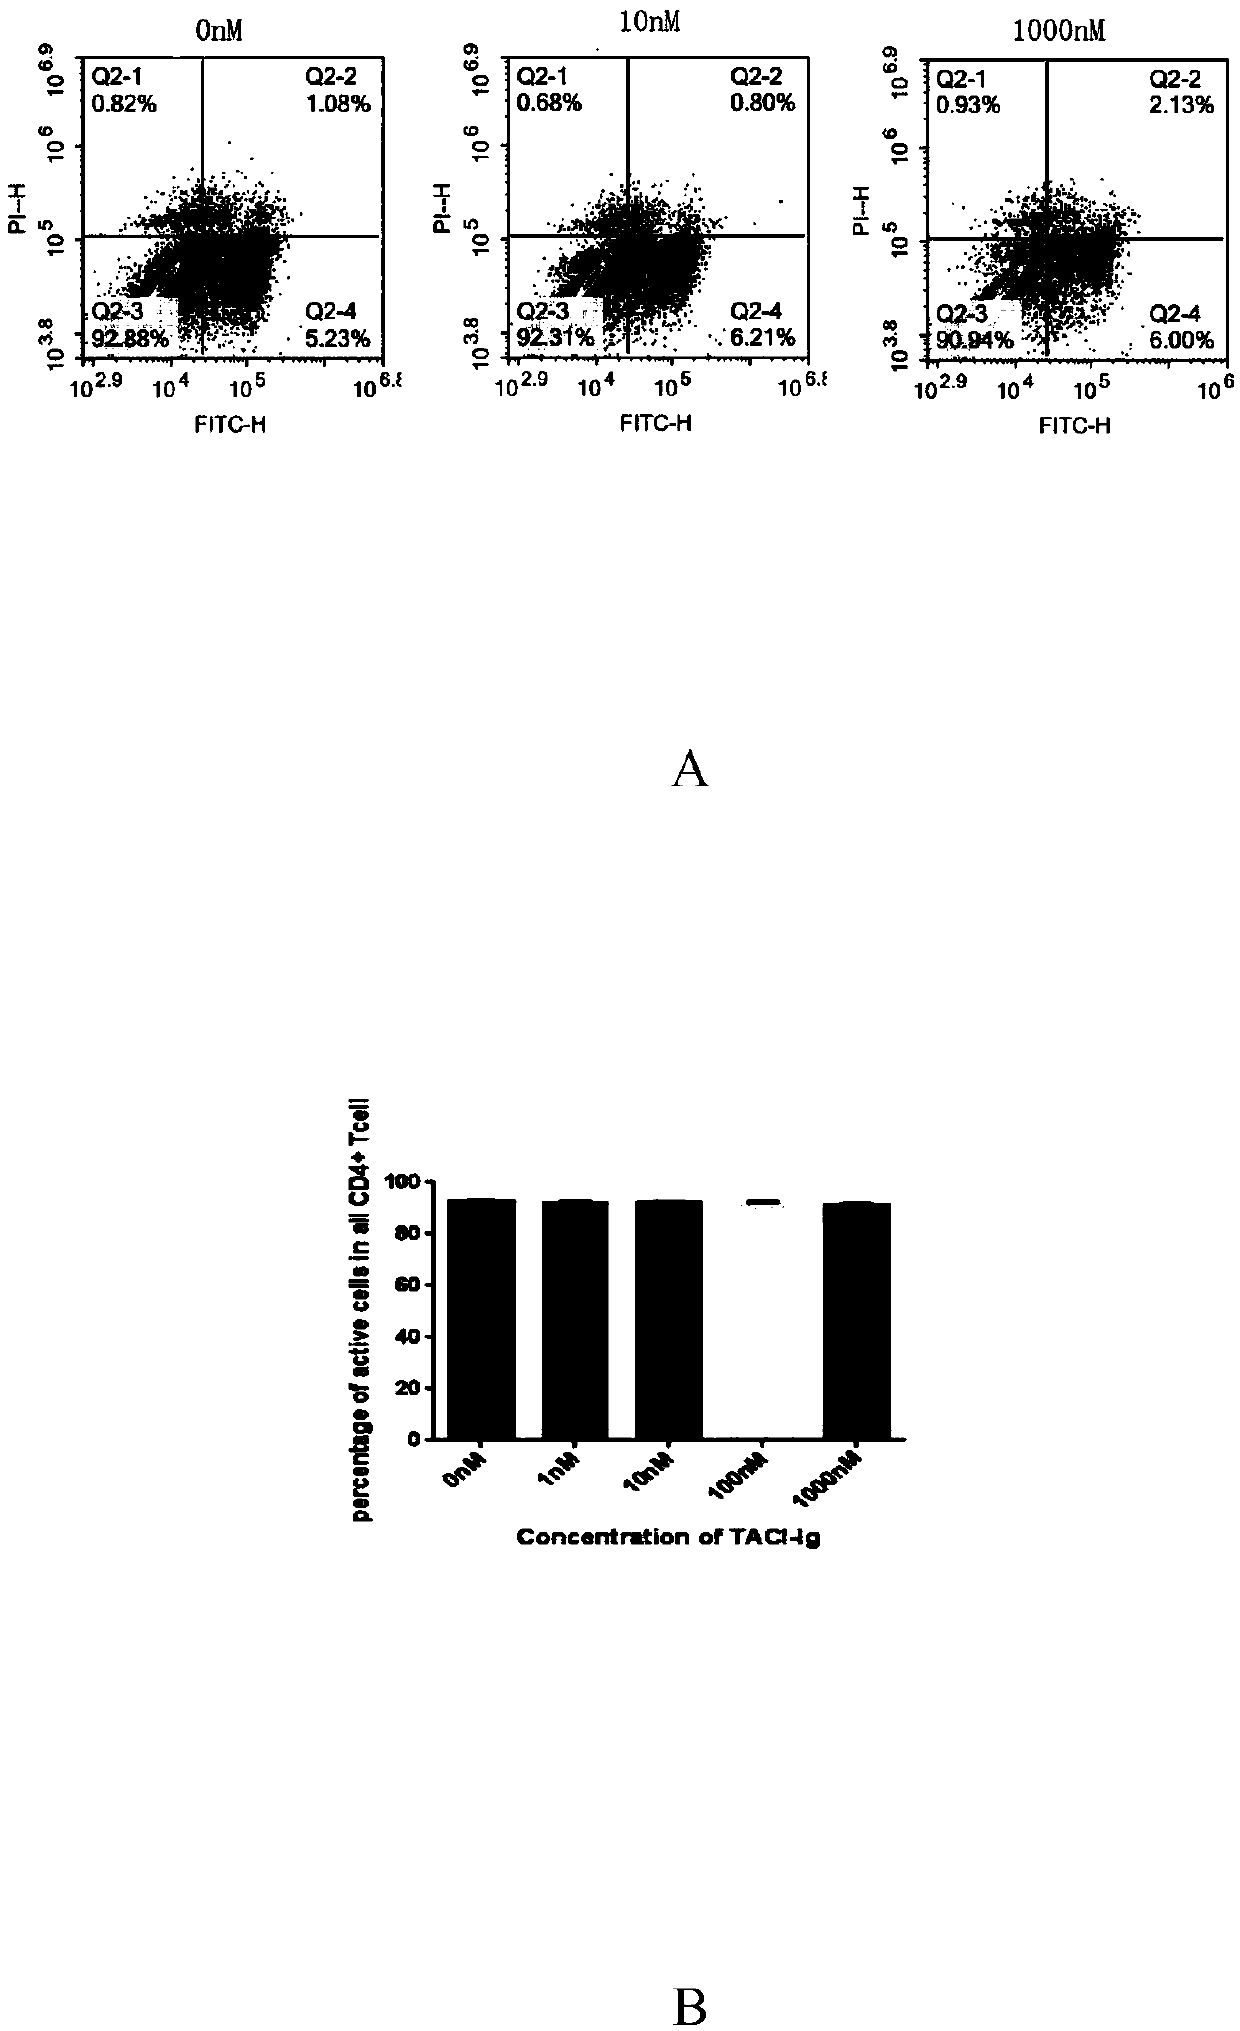 Application of TACI-Fc fusion protein to preparation of medicines for treating neuromyelitis opticaspectrum disorders and multiple sclerosis